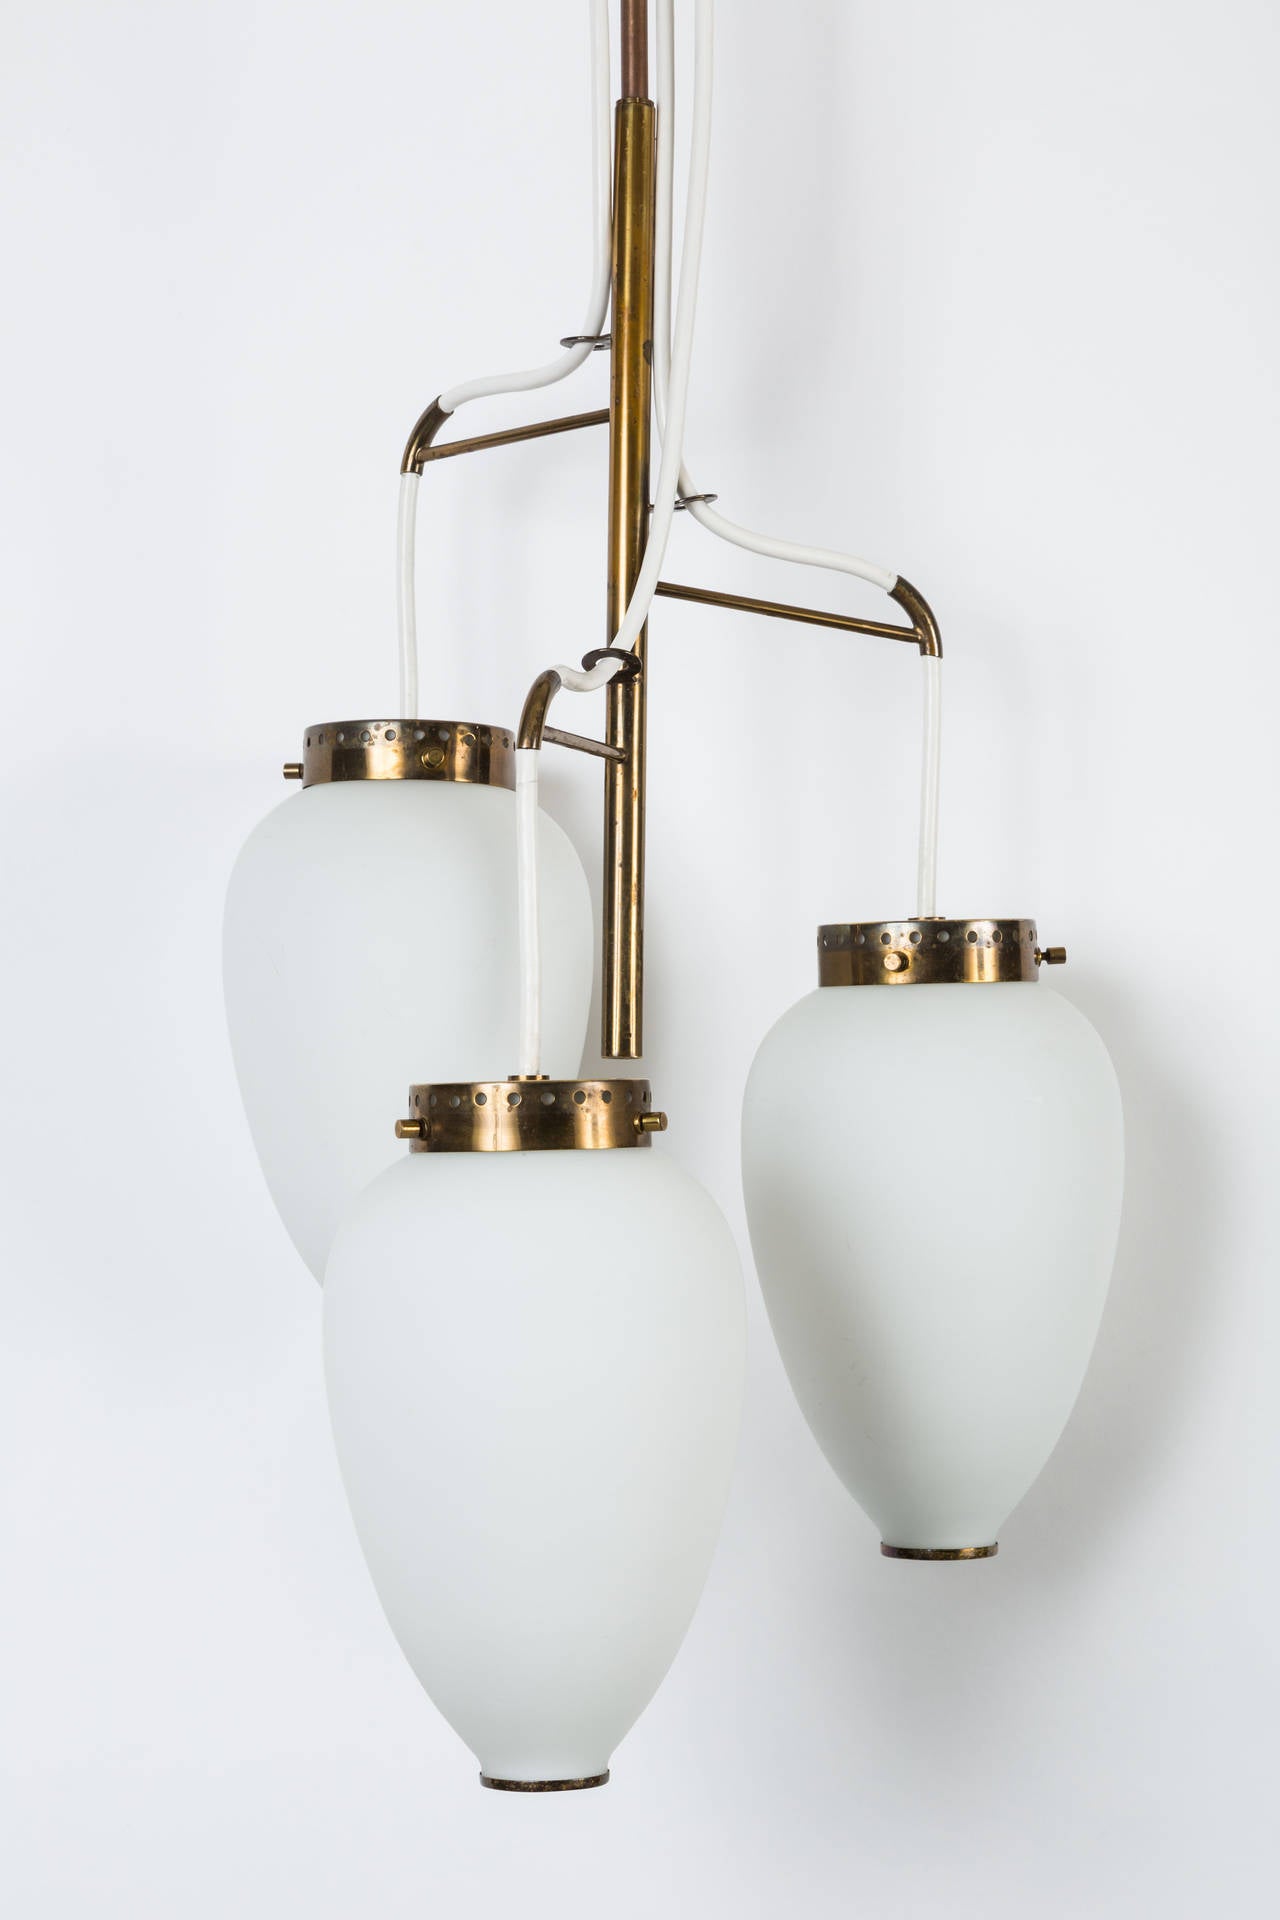 1950s Stilnovo 3-Globe Chandelier. A very elegant trio of satin finished opaline glass globes with attractively patinated brass details and armature.  Provides nice scale and a sculptural focal point with incomparable light. 

Available for viewing